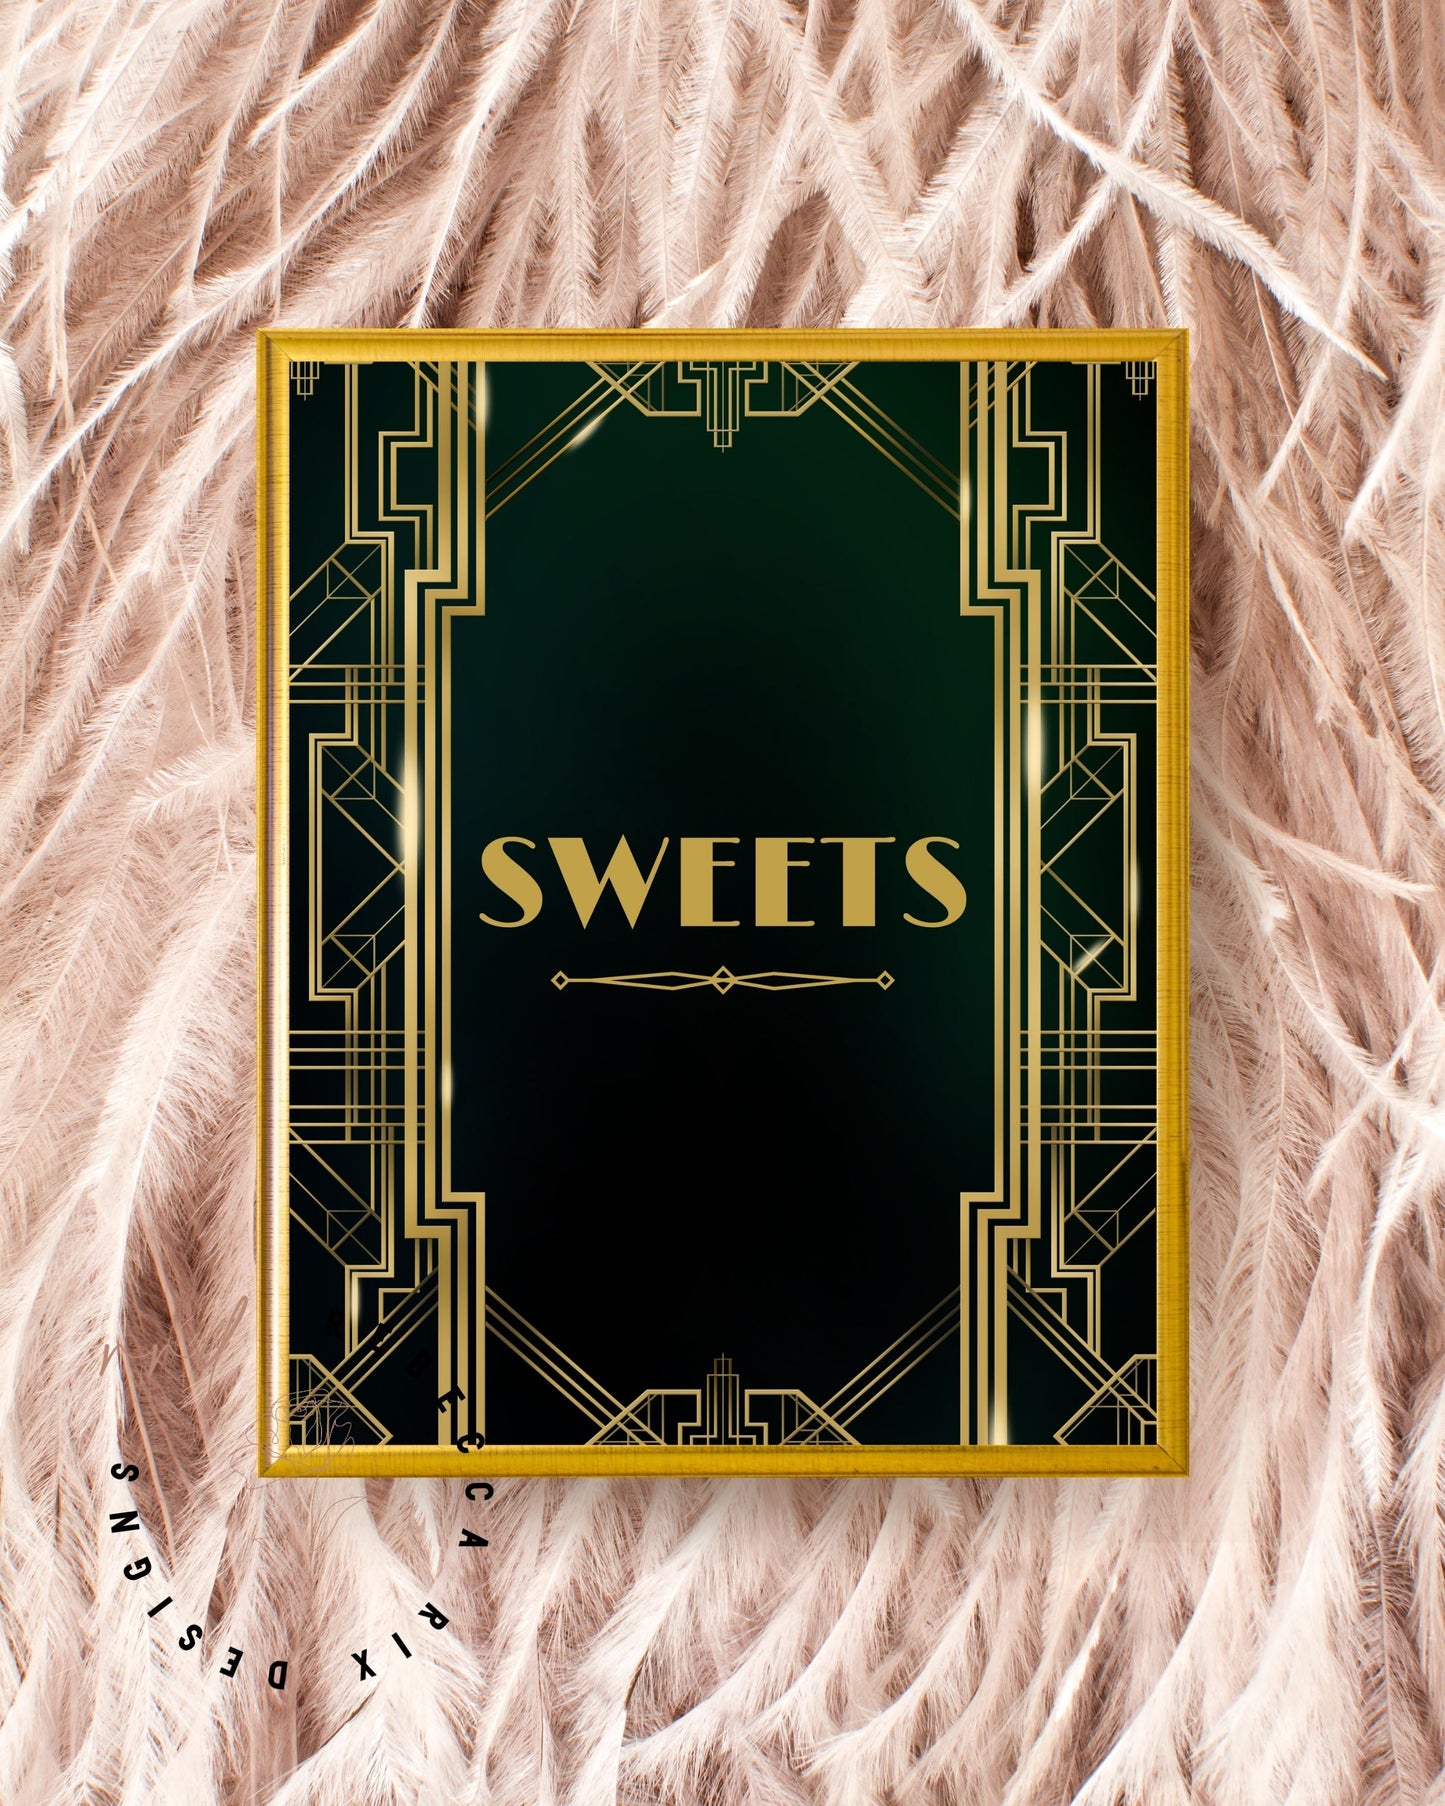 "Sweets" Art Deco Printable Party Sign For Great Gatsby or Roaring 20's Party Or Wedding, Black & Gold, Printable Party Decor